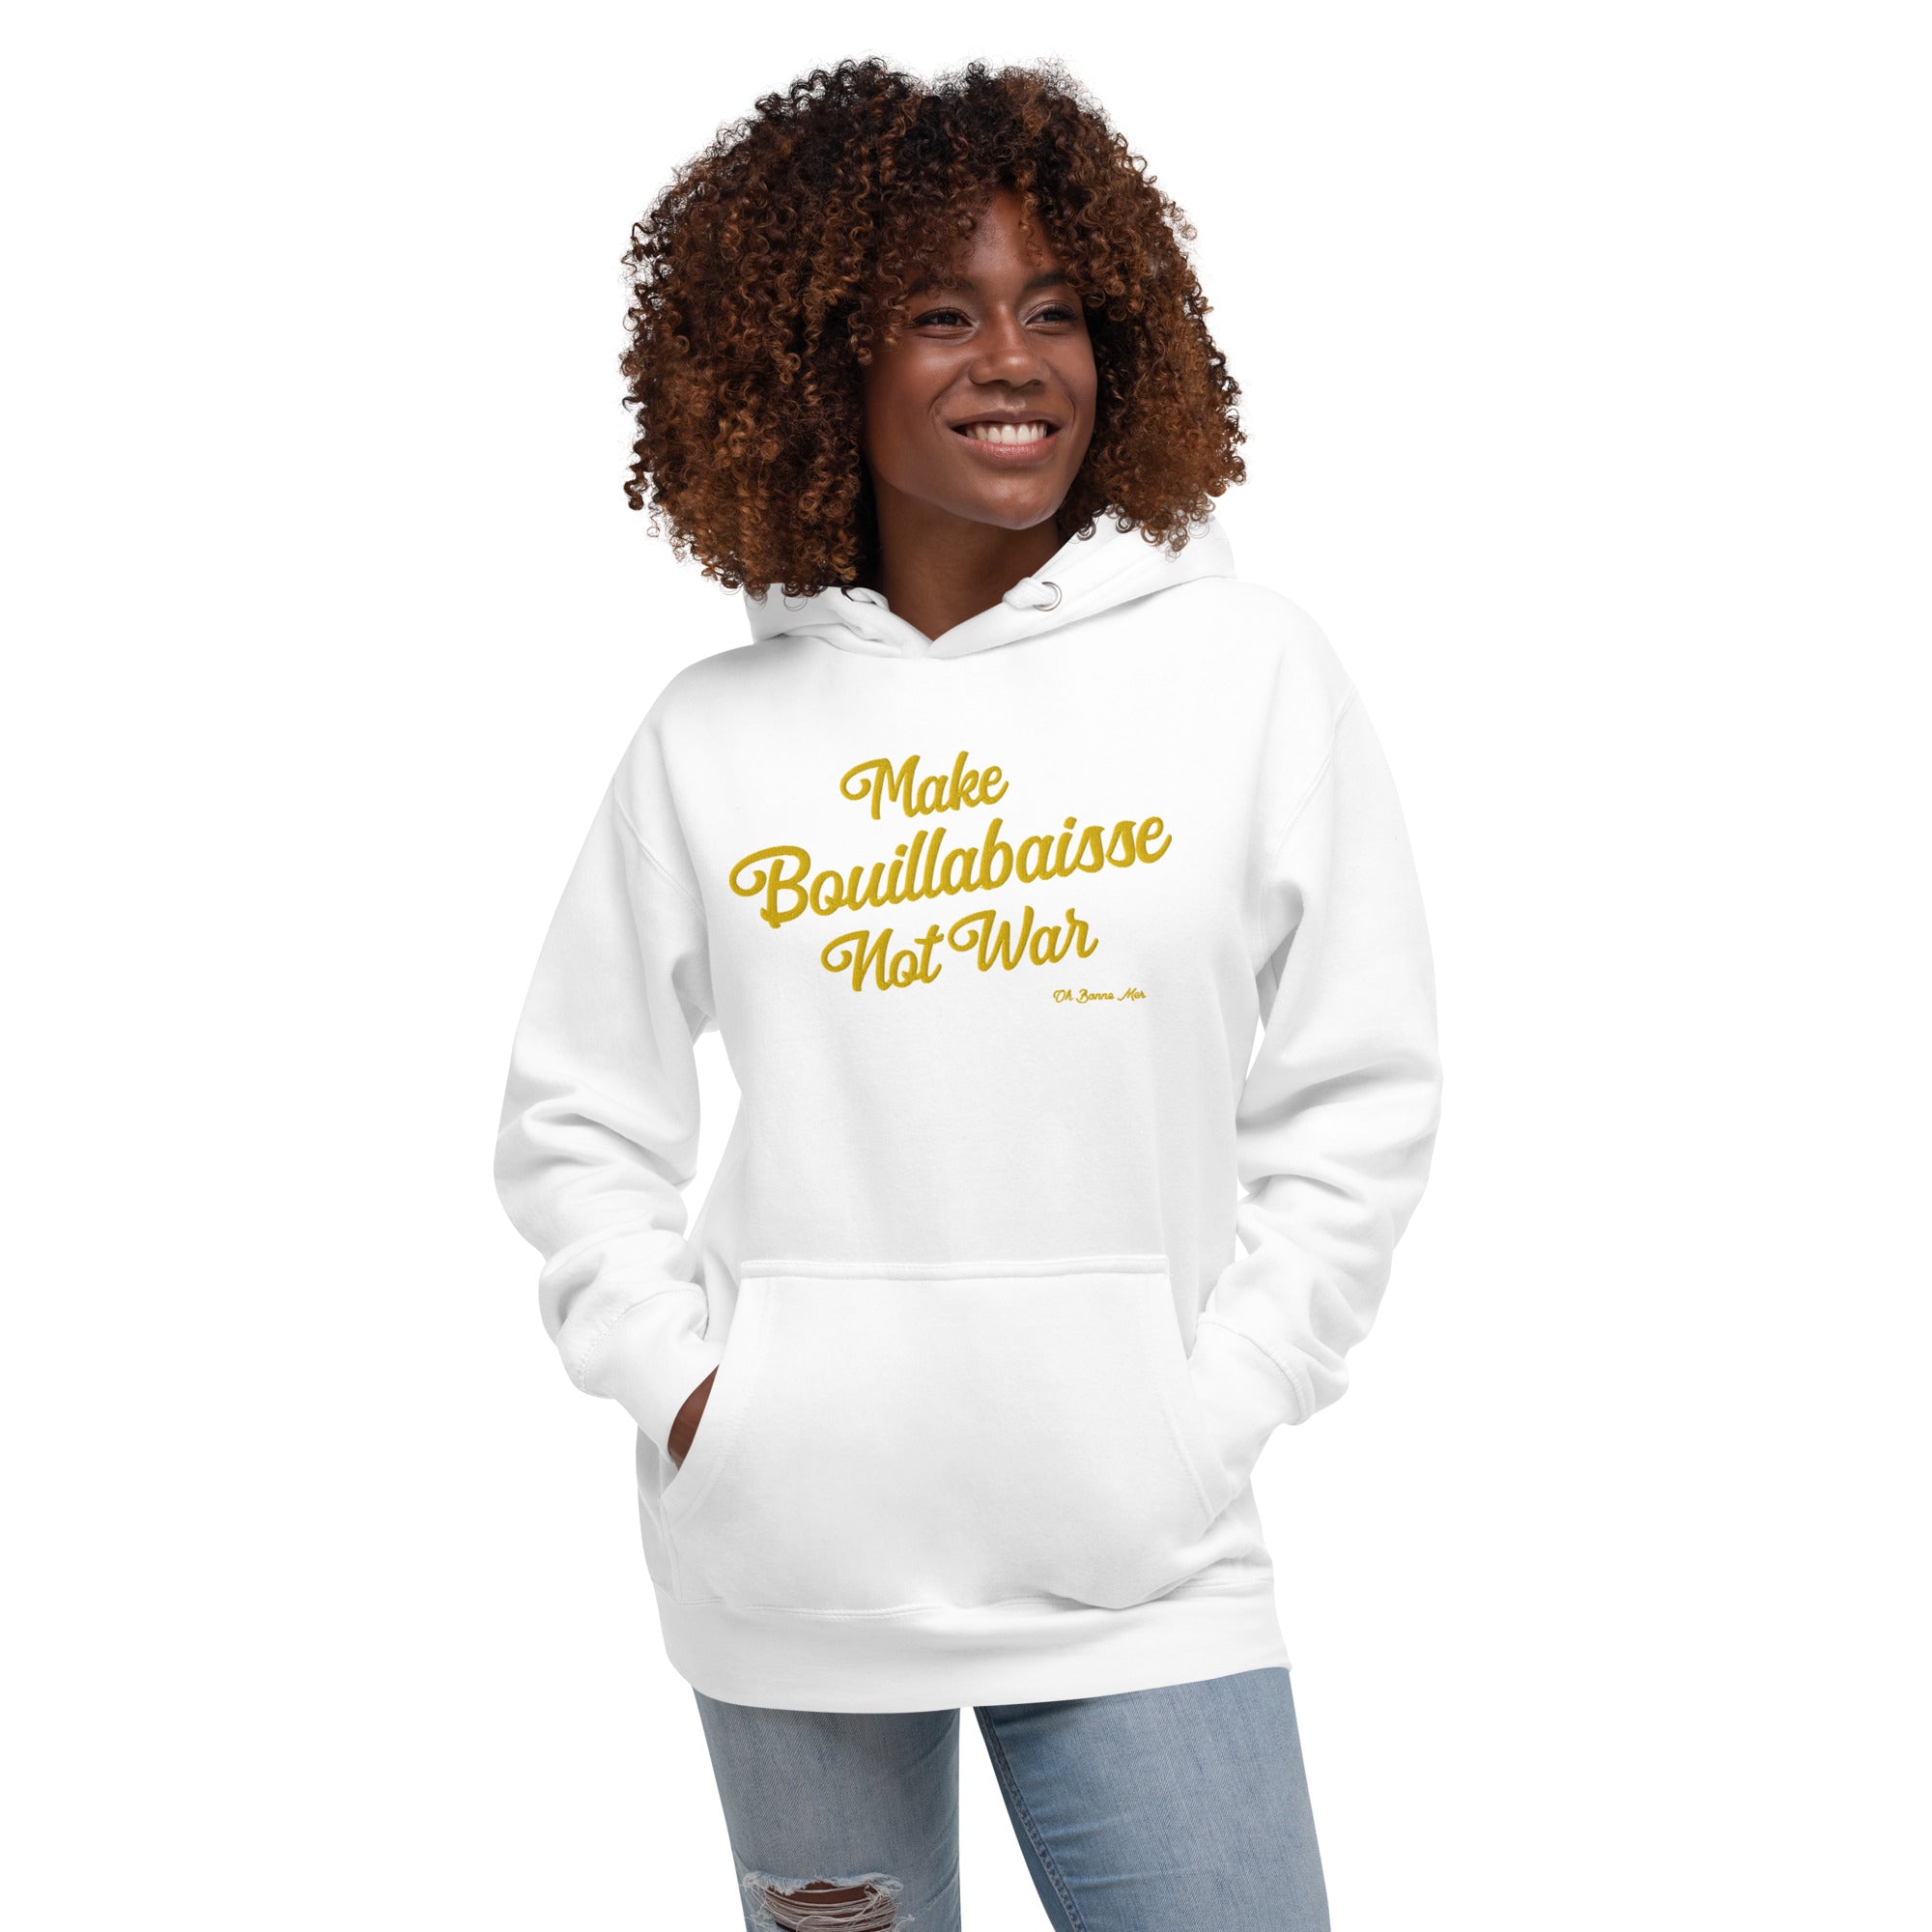 Unisex Cotton Hoodie Make Bouillabaisse Not War Gold large embroidered pattern on light colors